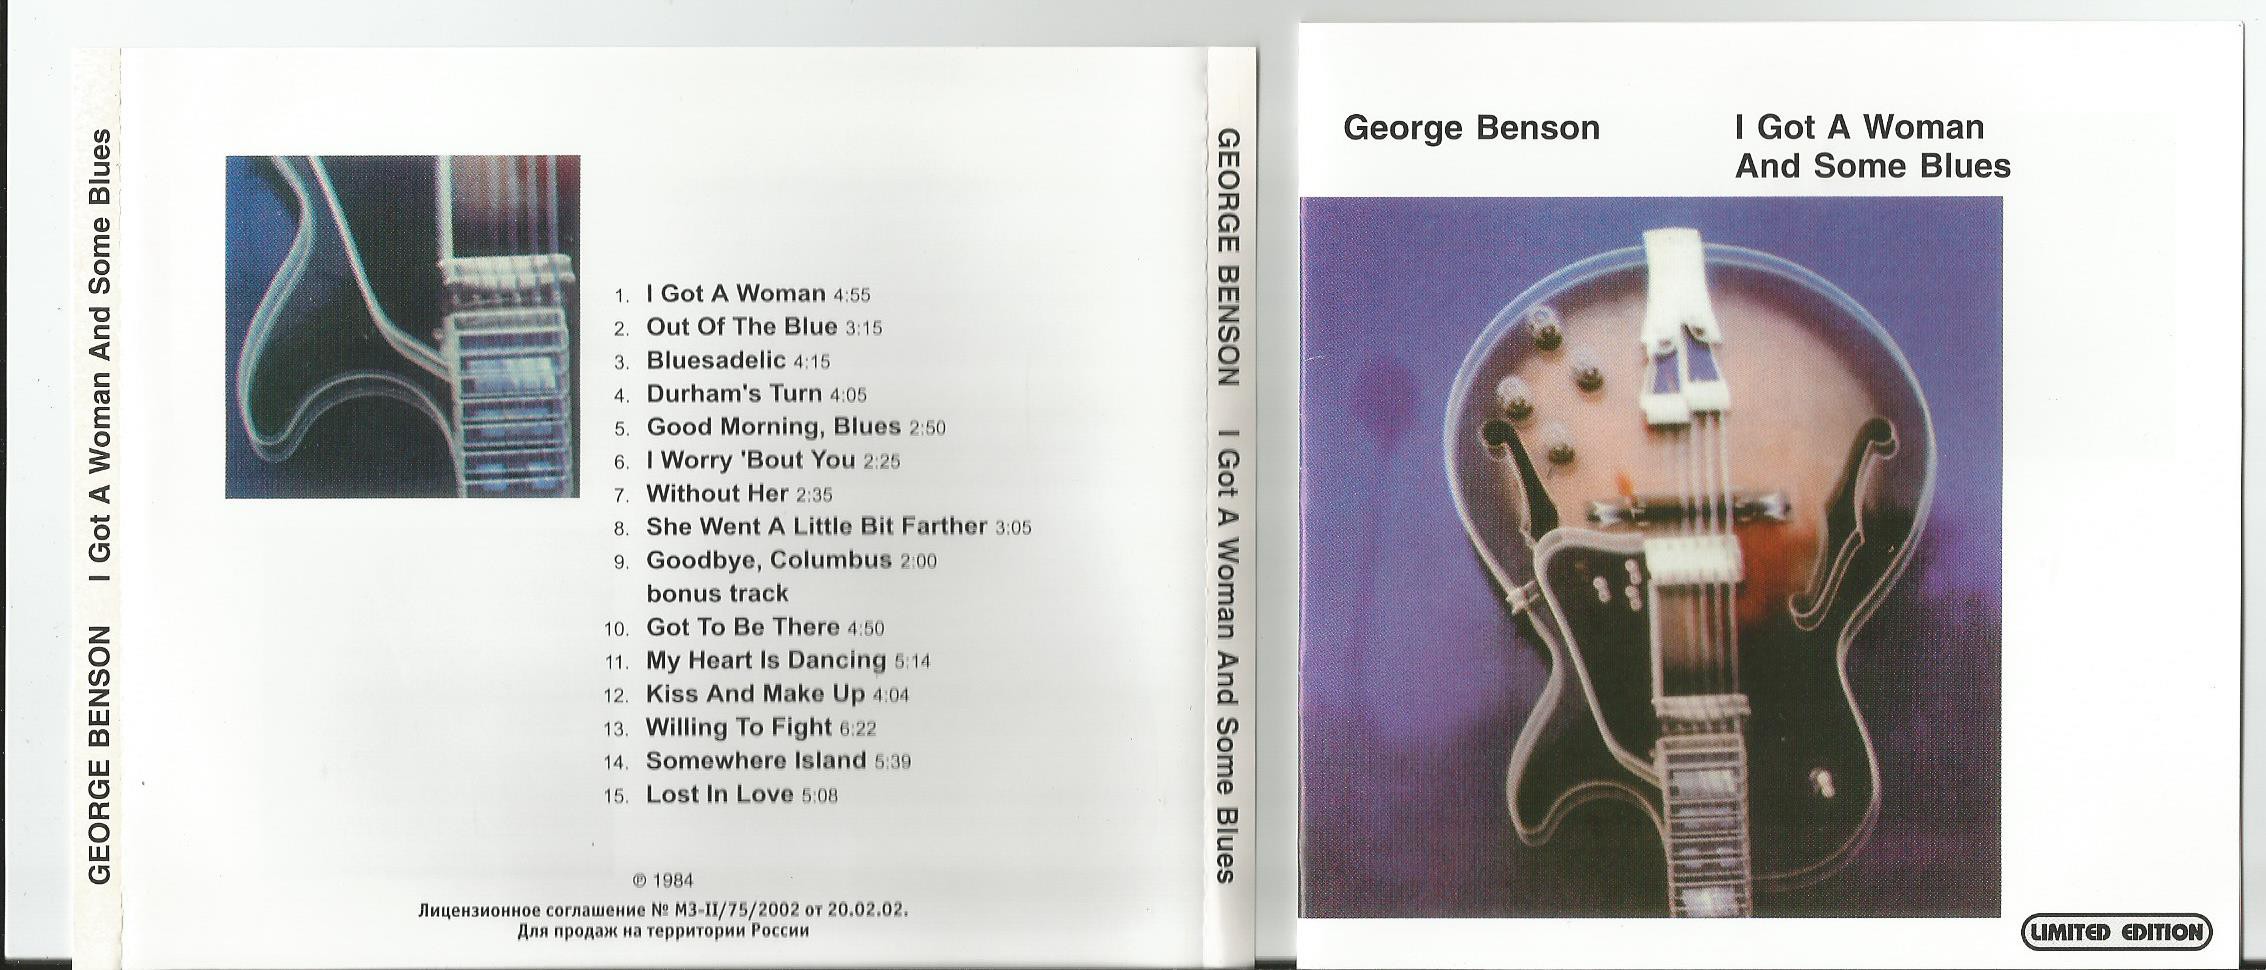 Beautiful things бенсона буна текст. George Benson. Songs and stories Джордж Бенсон. George Benson - Bad Benson - 1974. Al Jarreau. George Benson обложка.